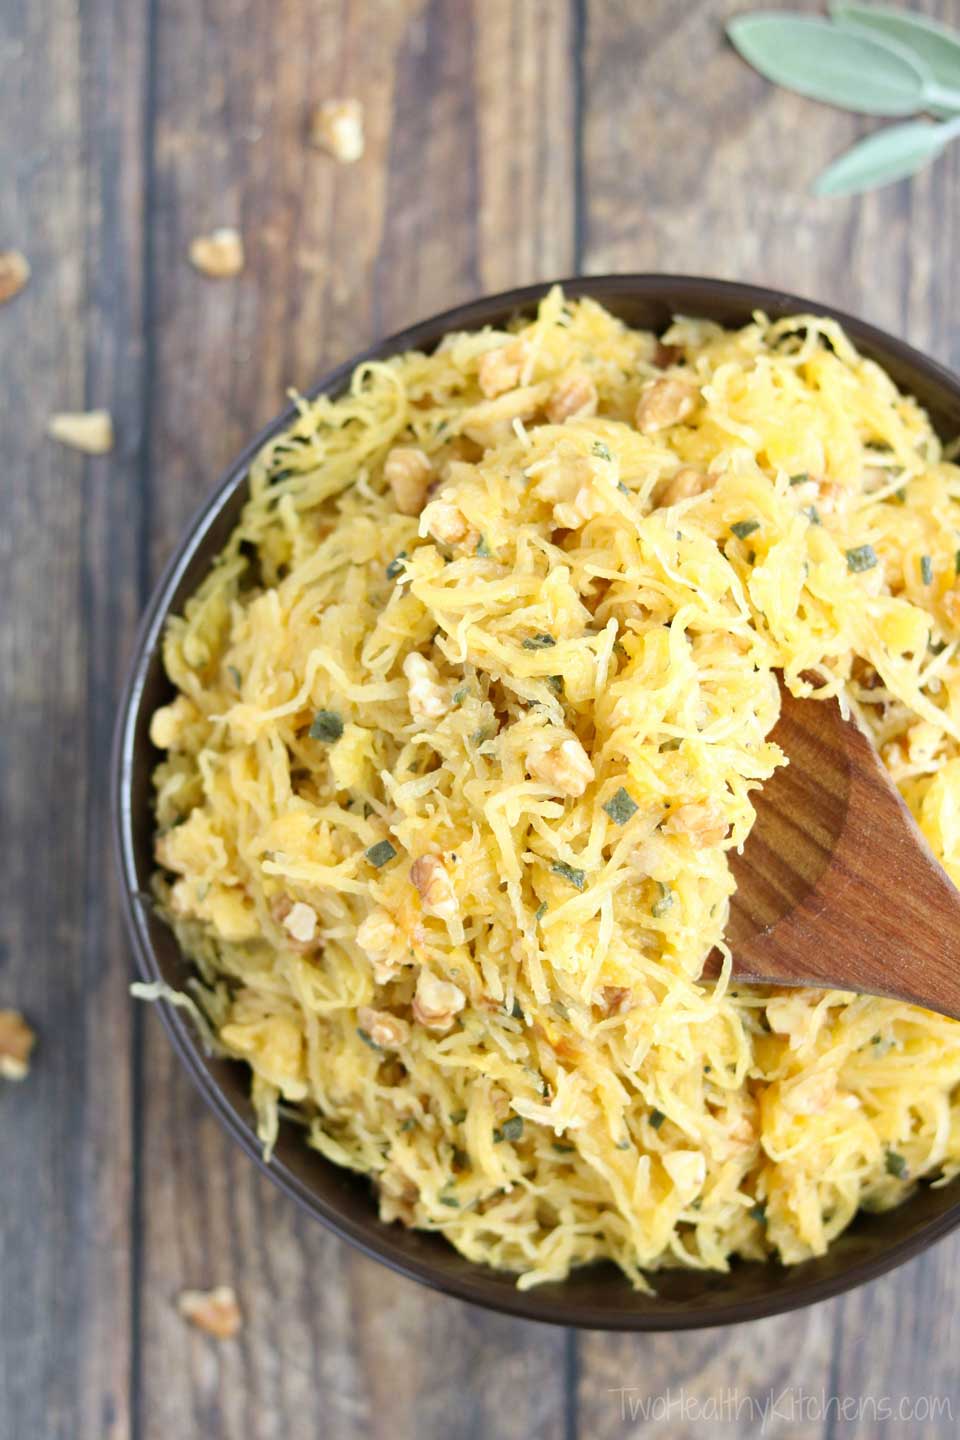 This fantastic recipe for Microwave Spaghetti Squash is easy enough for weeknights, but impressive enough for Thanksgiving dinner and holiday buffets! Rich browned butter with crunchy, toasted walnuts and fragrant sage - amazing! With just 5 ingredients, this easy spaghetti squash recipe is a total snap – yet surprisingly, satisfyingly delicious! Lots of easy tips, too – toasting nuts, browning butter, cooking spaghetti squash perfectly, and stuffed spaghetti squash! | www.TwoHealthyKitchens.com